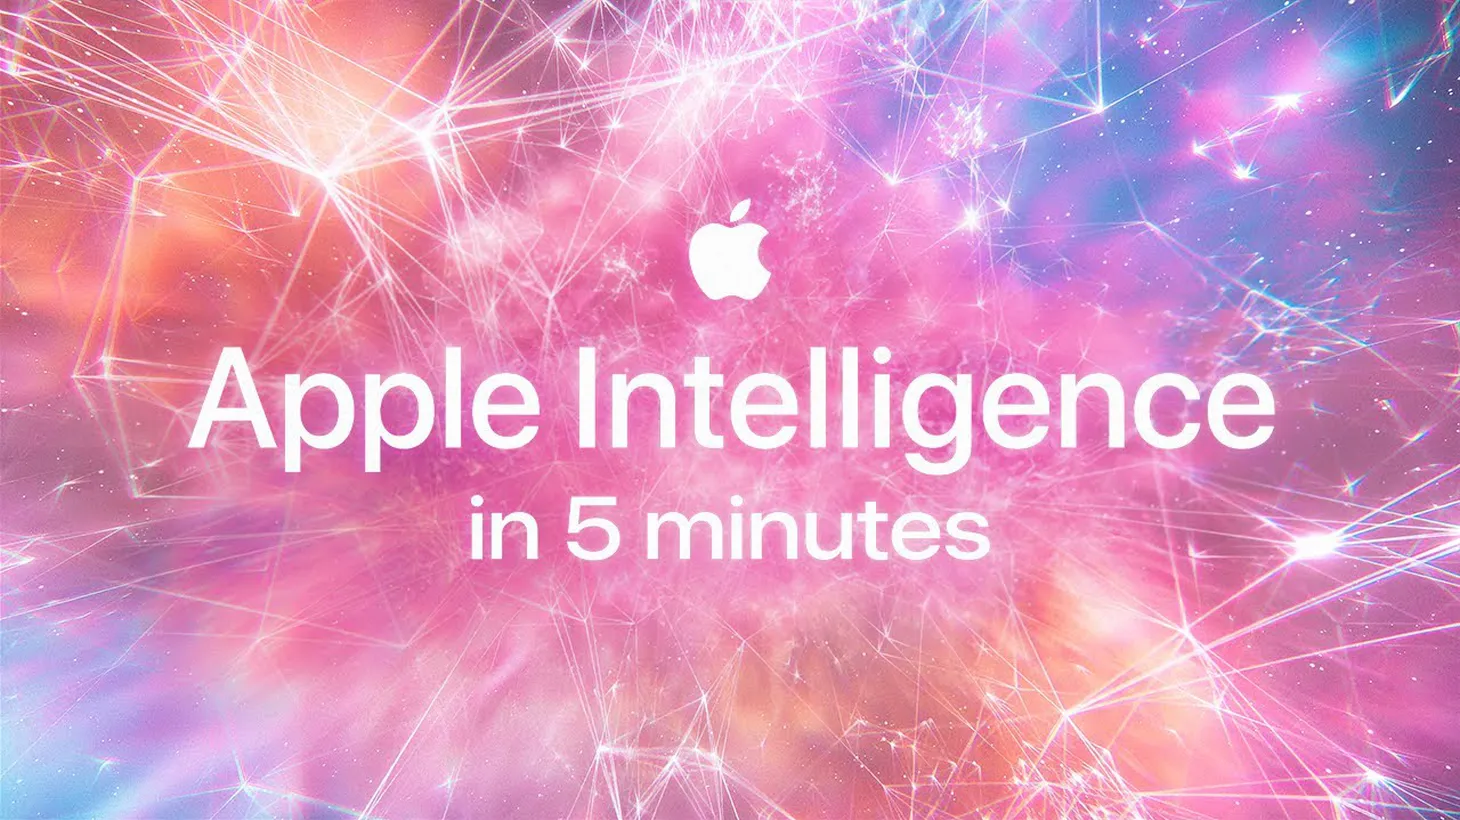 Apple Intelligence touts that it can change the tone of your email to “friendly, professional, or concise.”